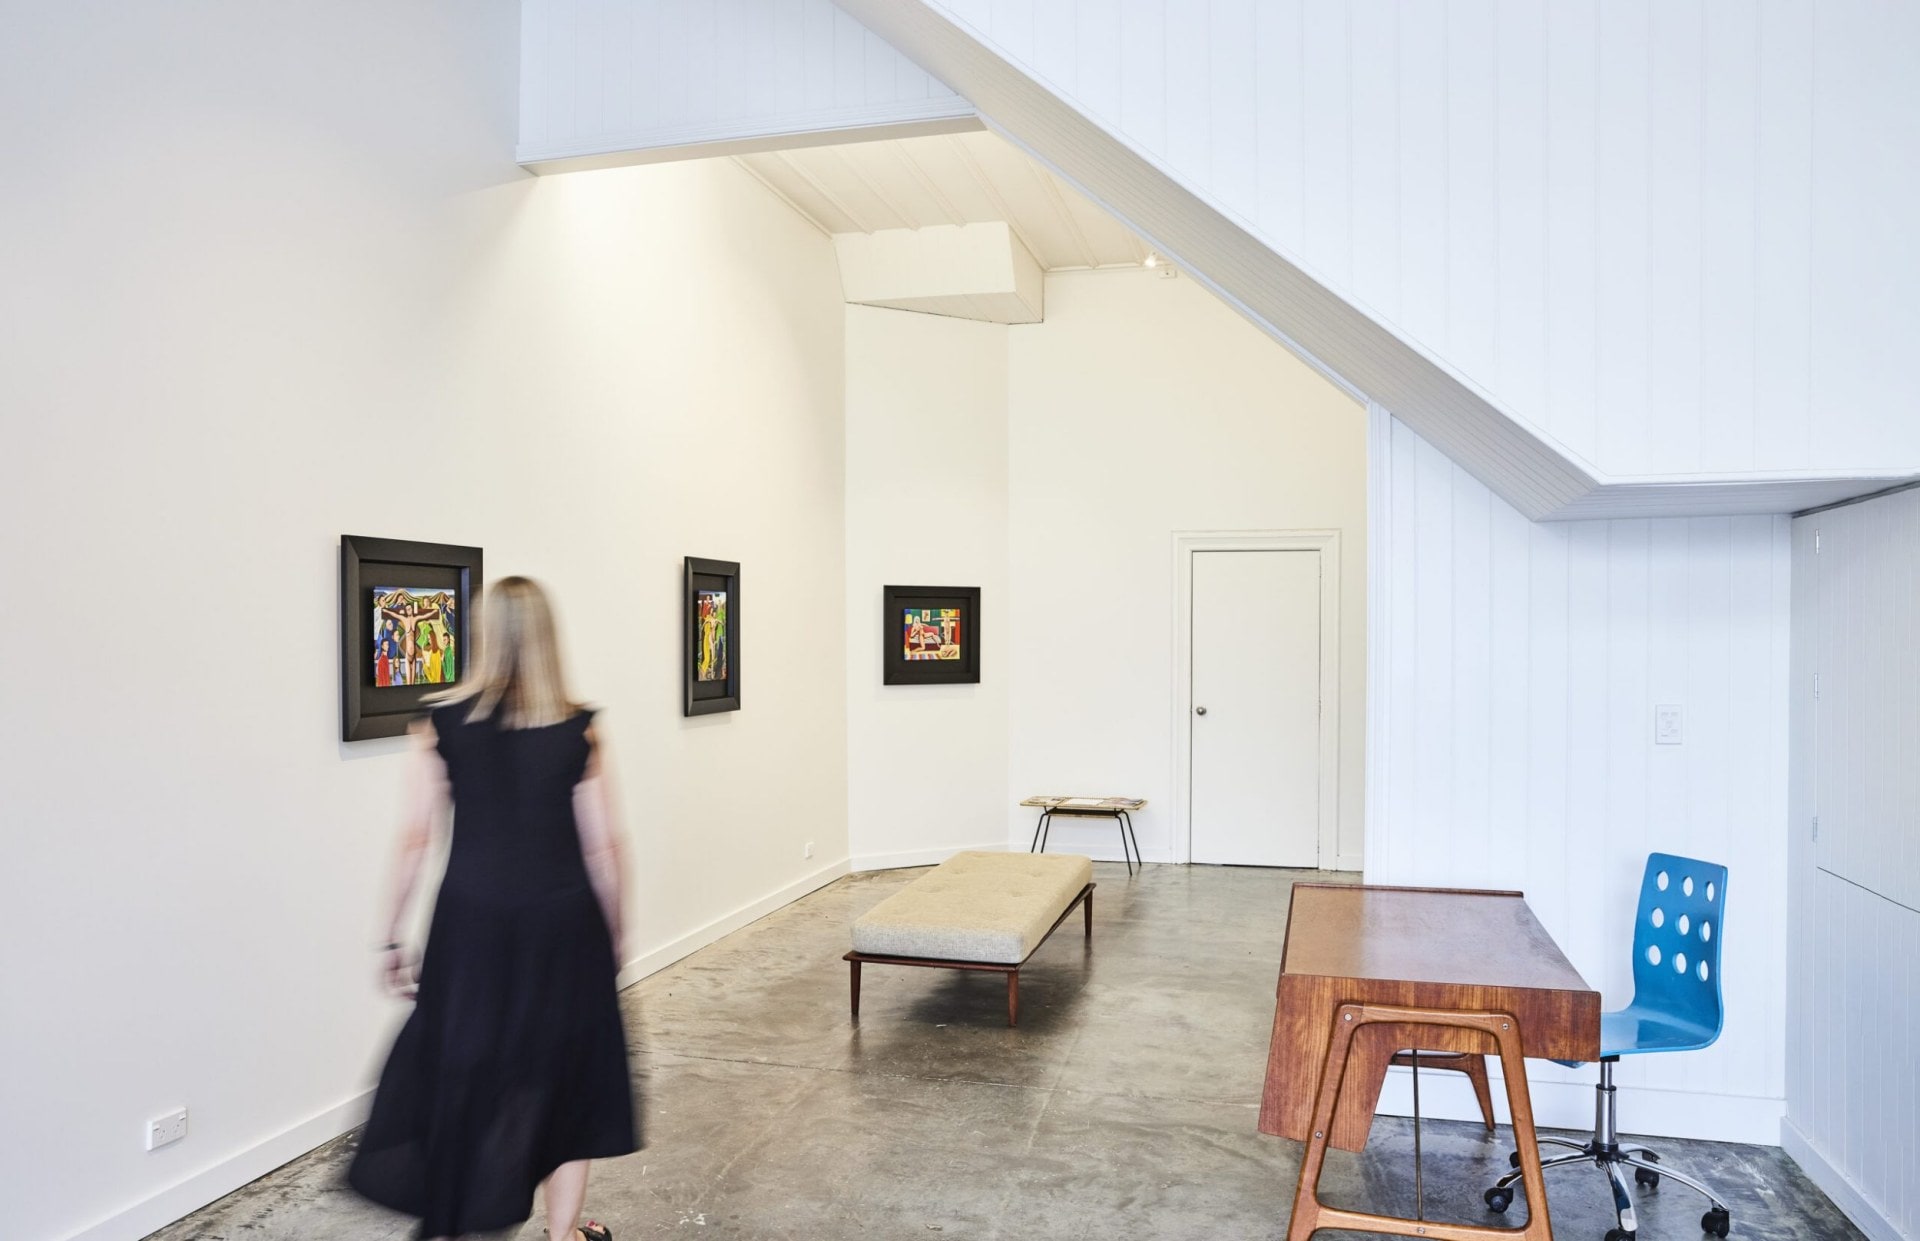 Interior of Suite gallery in Ponsonby. A woman wearing a black dress is walking through a tall white room with grey floors and three hanging artworks